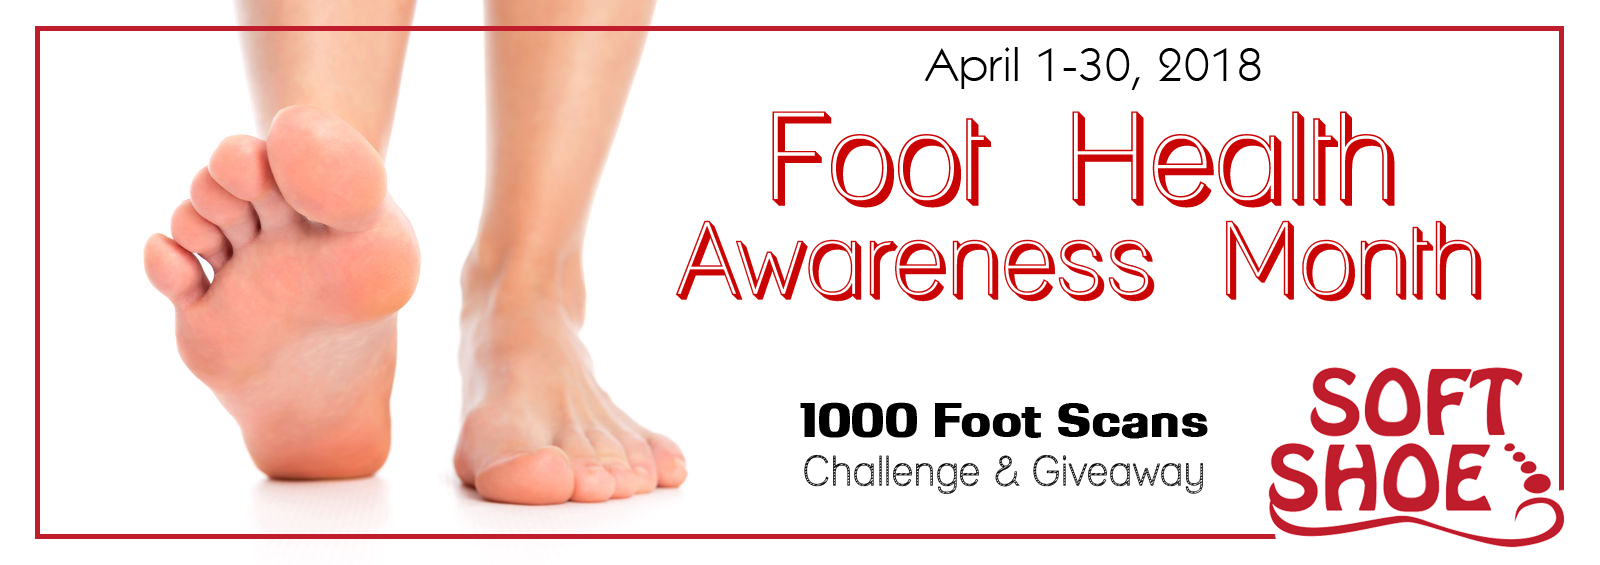 April is Foot Health Awareness Month (Giveaway) Soft Shoe